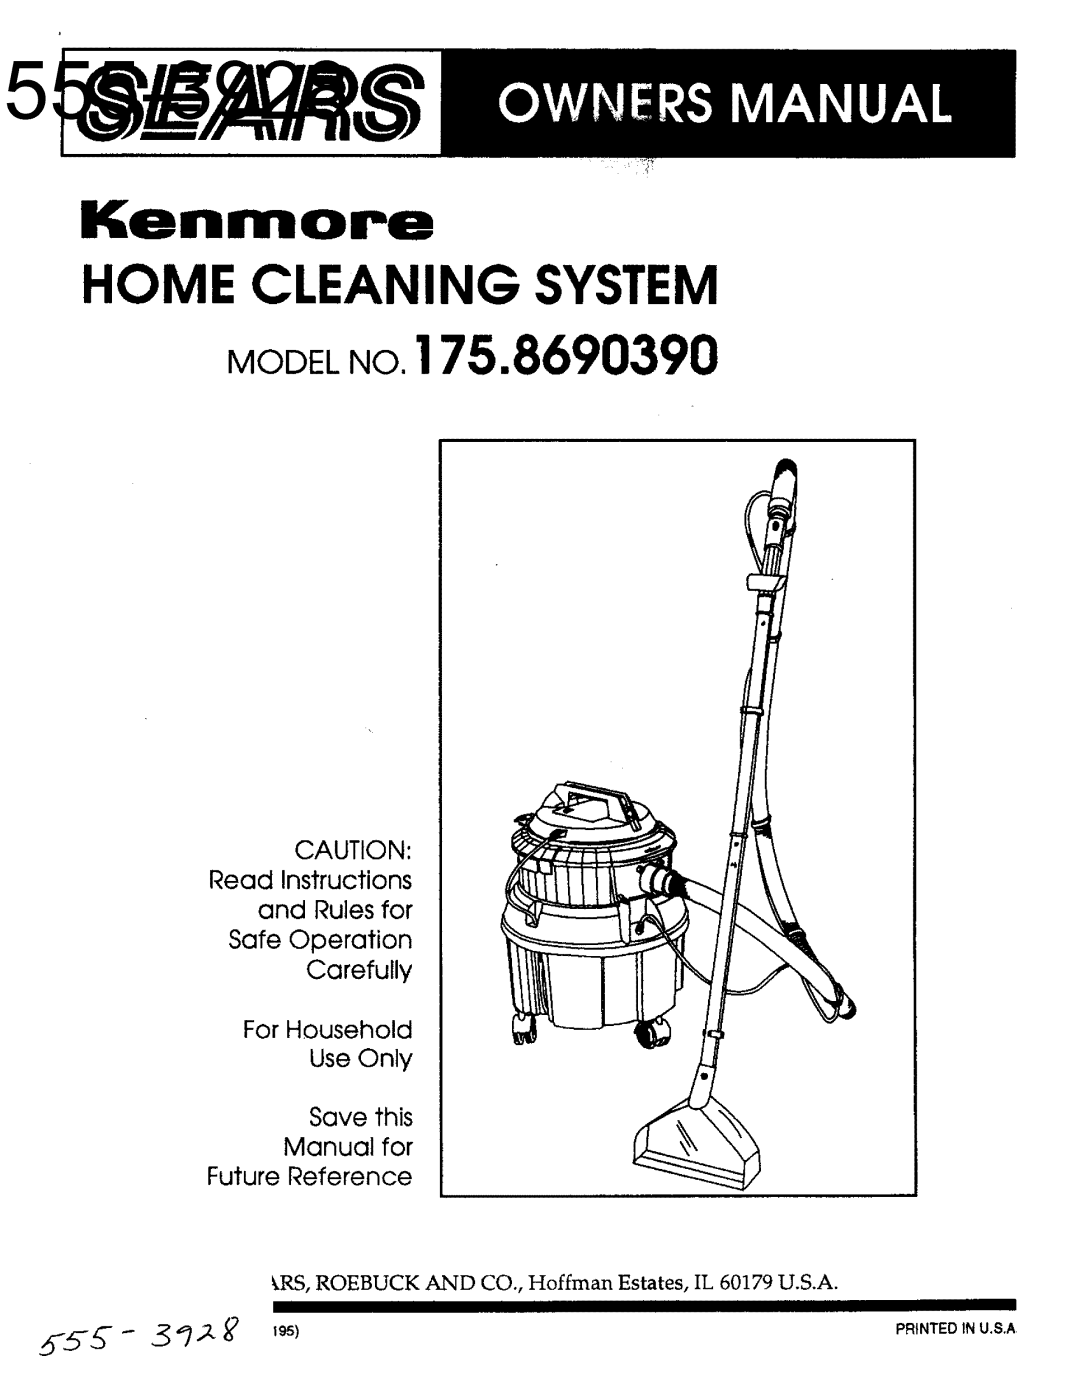 Kenmore 175.869039 manual Home Cleaning System Model No, CAUTION: Read Instructions and Rules for, Ken oPe, b5--K 